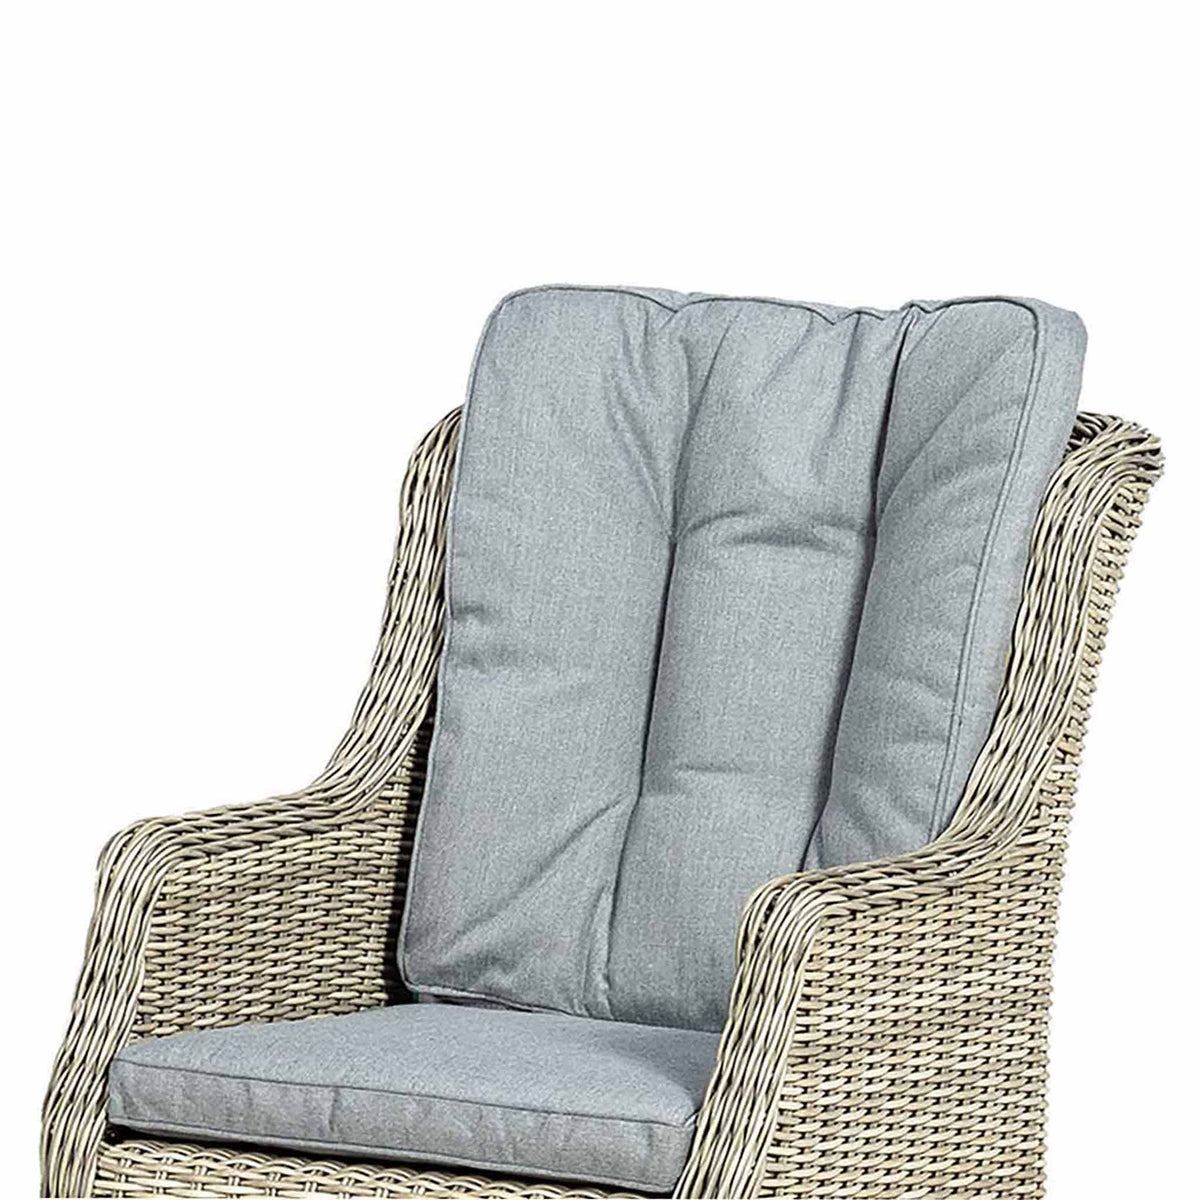 Wentworth High-back Rattan Companion Set - Close up of cushions on chair